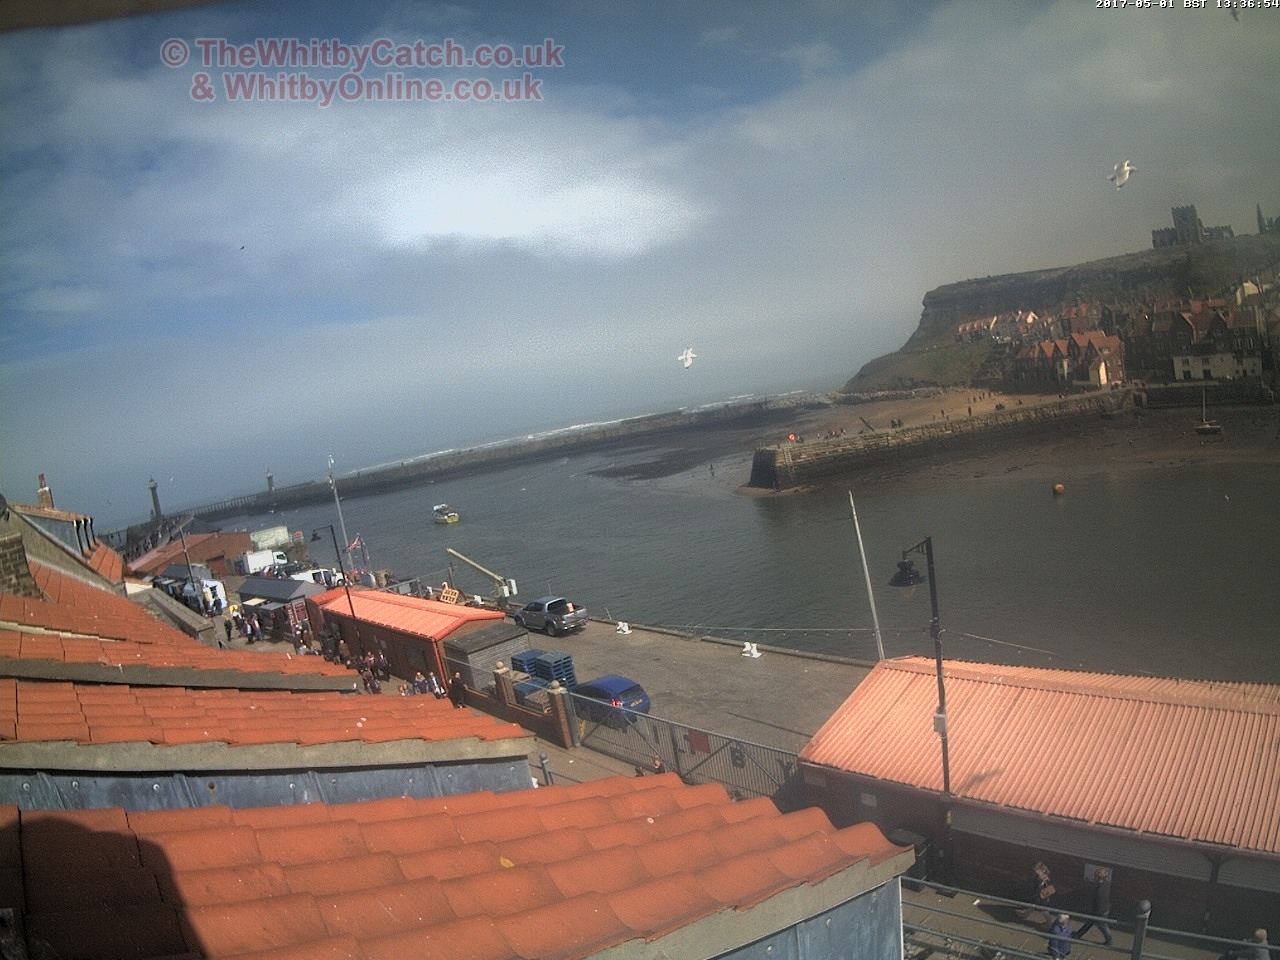 Whitby Mon 1st May 2017 13:37.